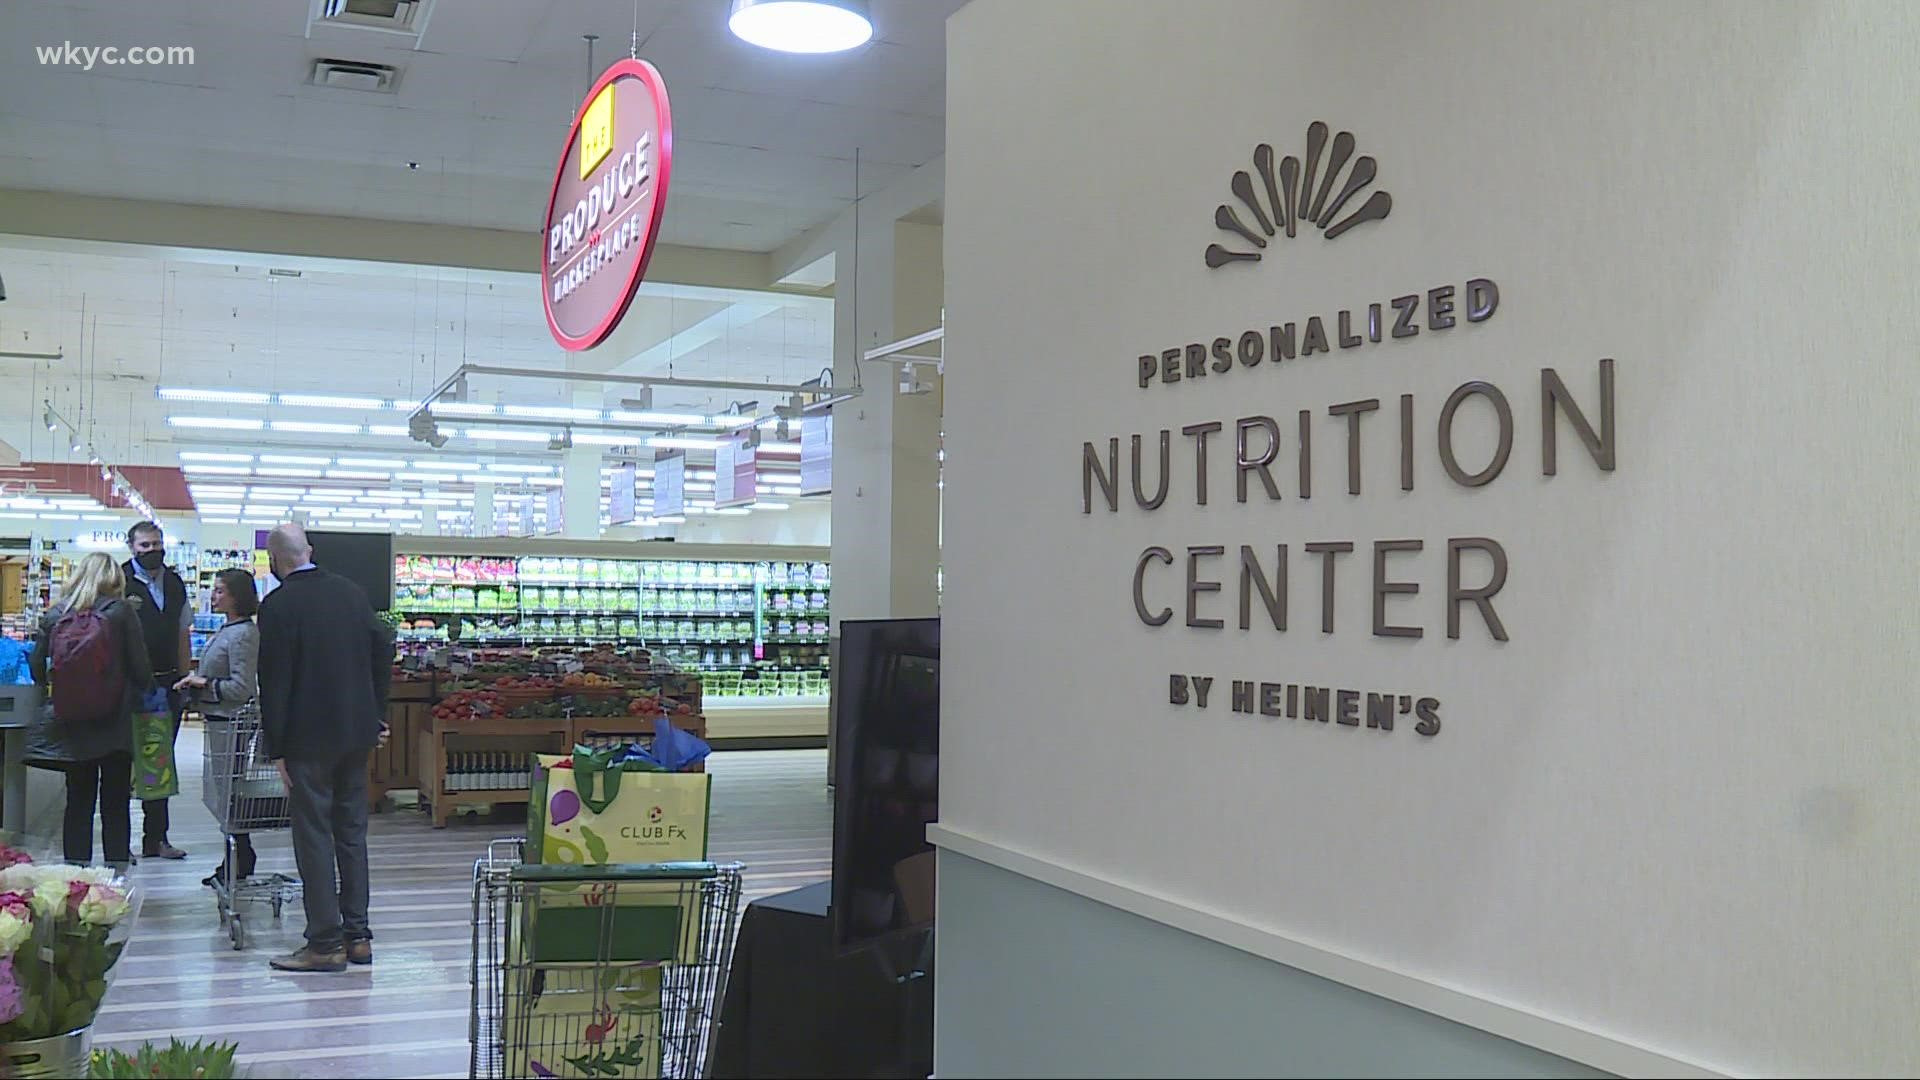 The grocery store chain opened a new center at its Mayfield Village location to assist shoppers in changing diets according to personal health stats.